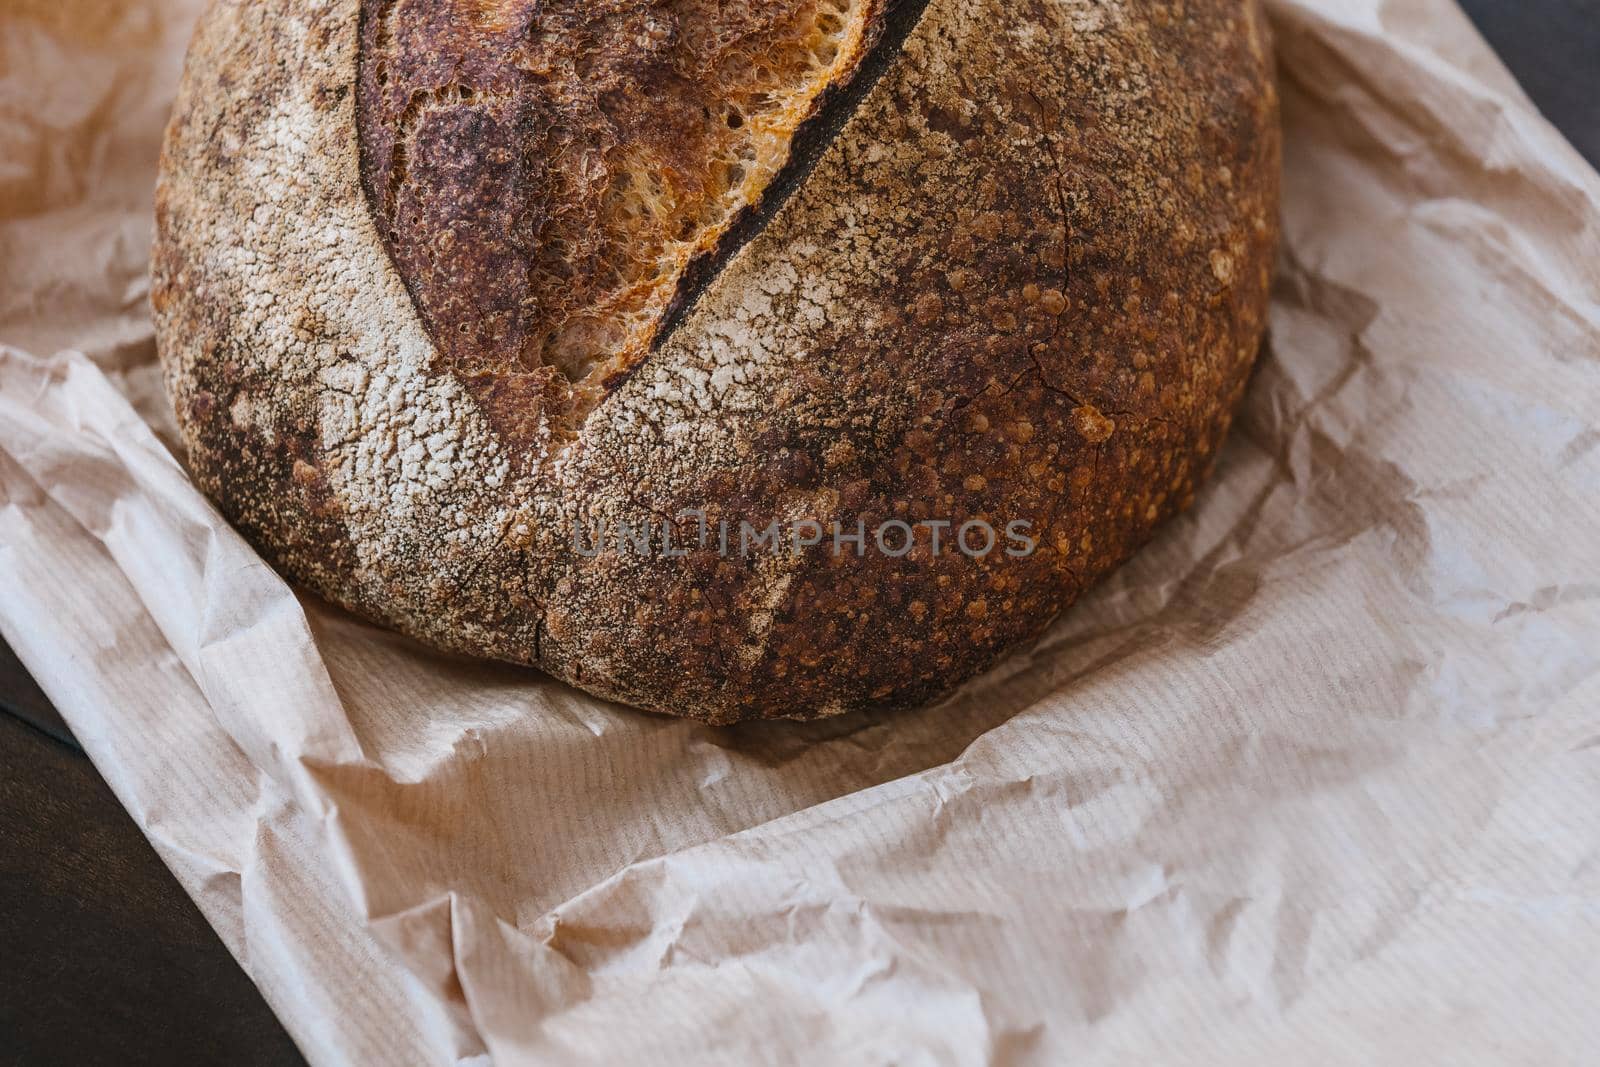 Homemade bread on craft paper on kitchen table. Crispy baked wheat bread surface texture. Selective focus. by apavlin